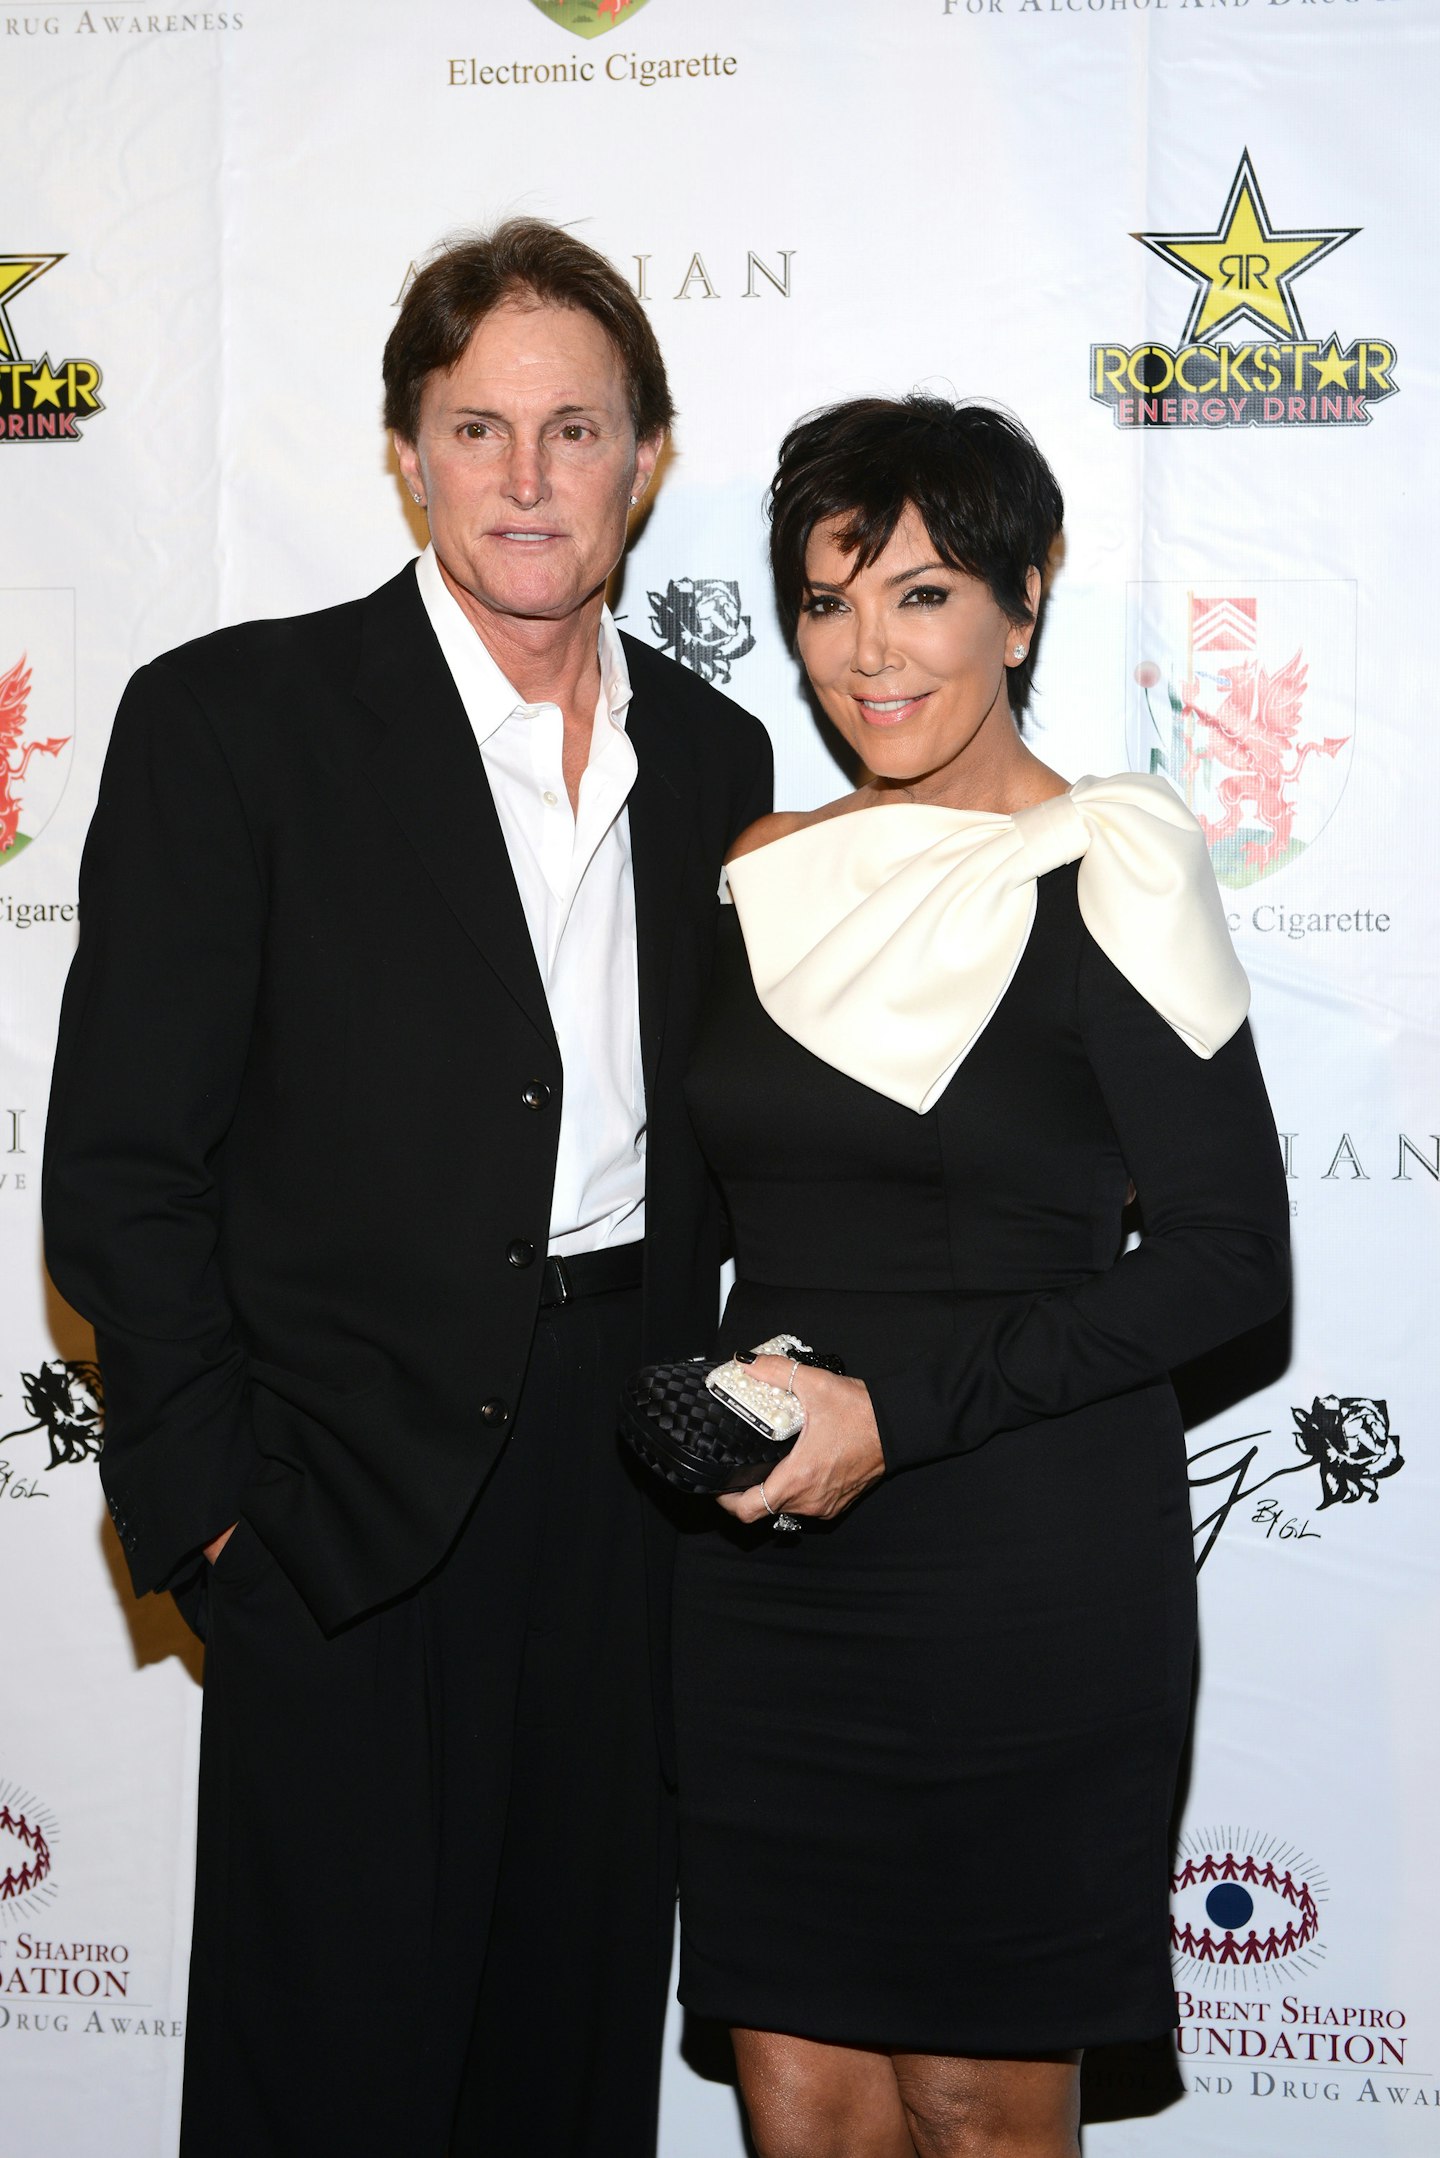 Bruce and Kris Jenner